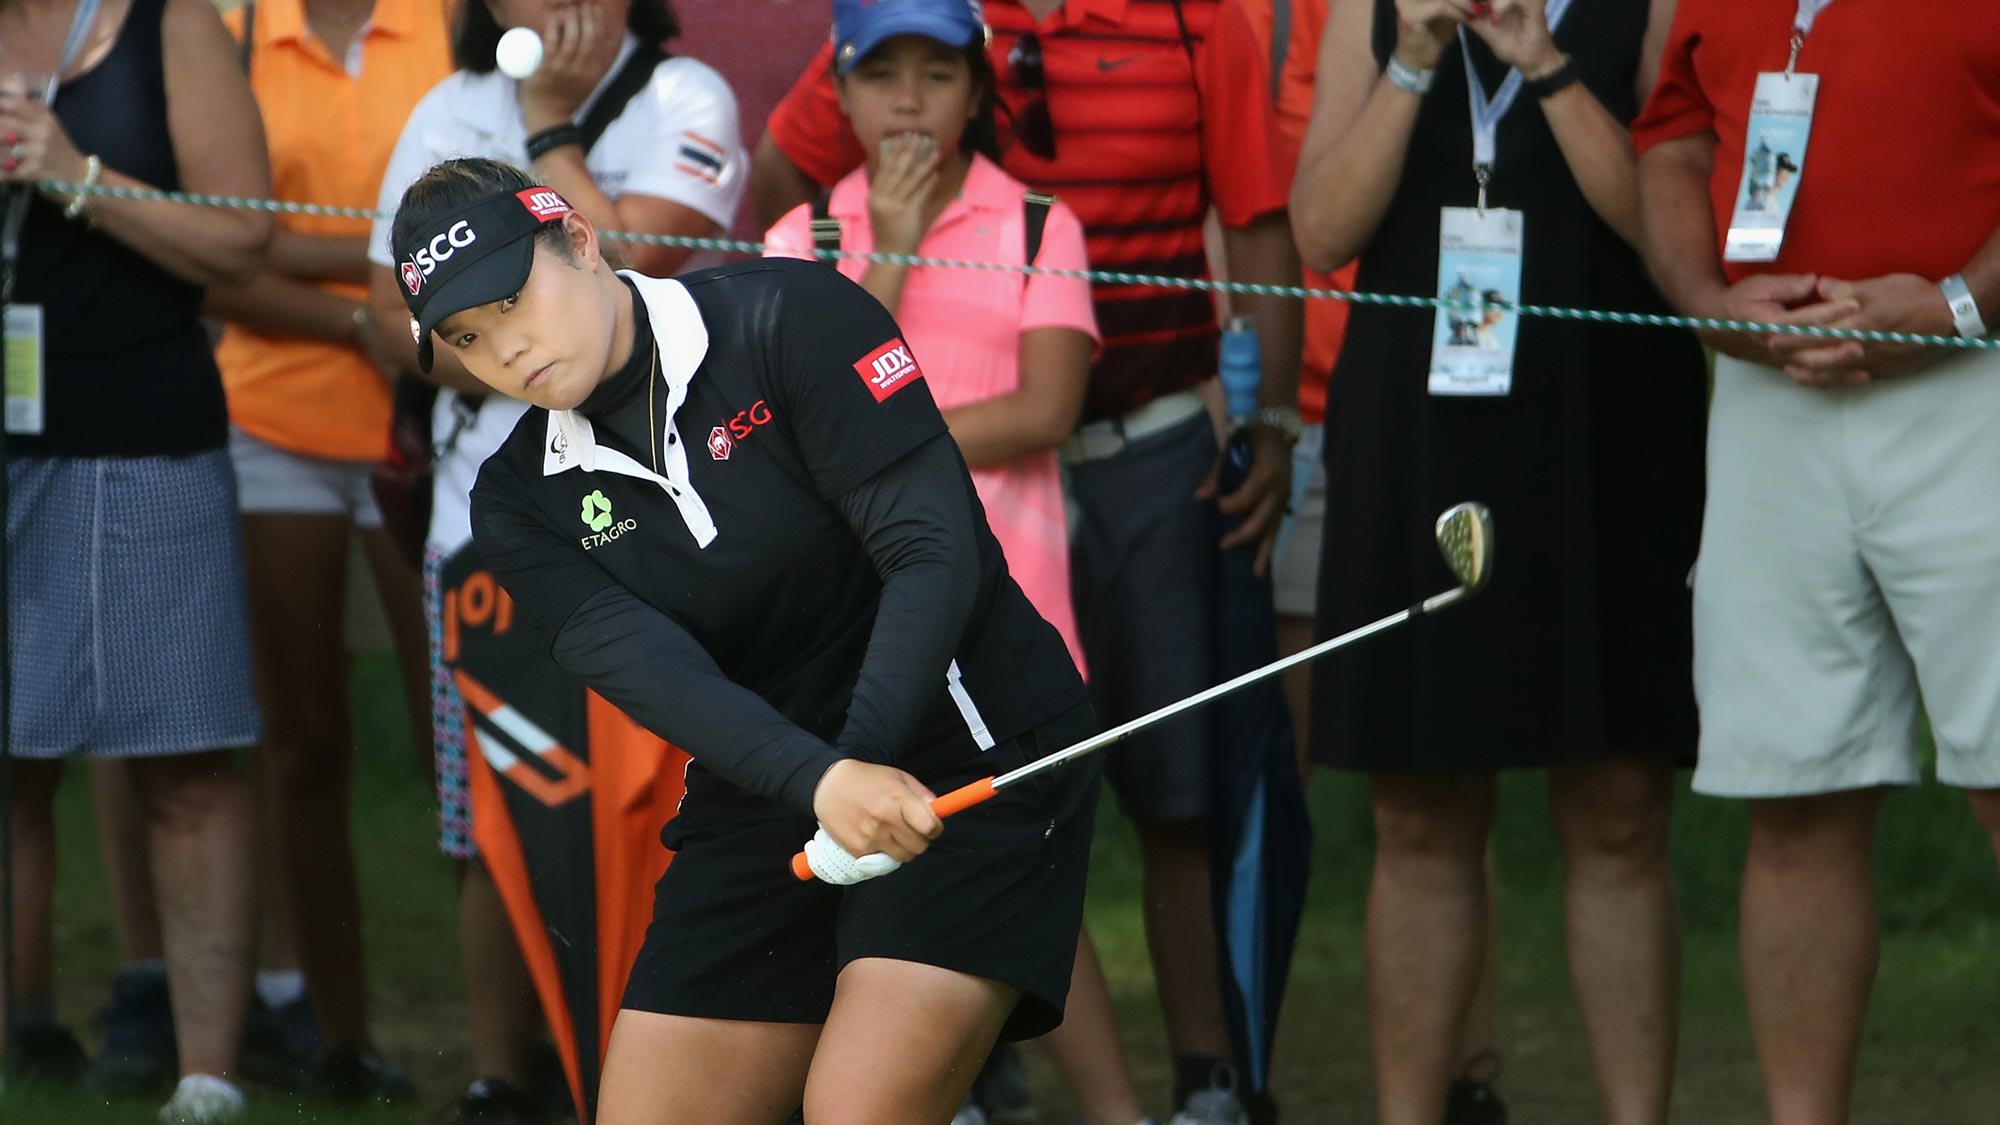 Ariya Jutanugarn of Thailand chips onto the second green during the final round of the 2018 U.S. Women's Open